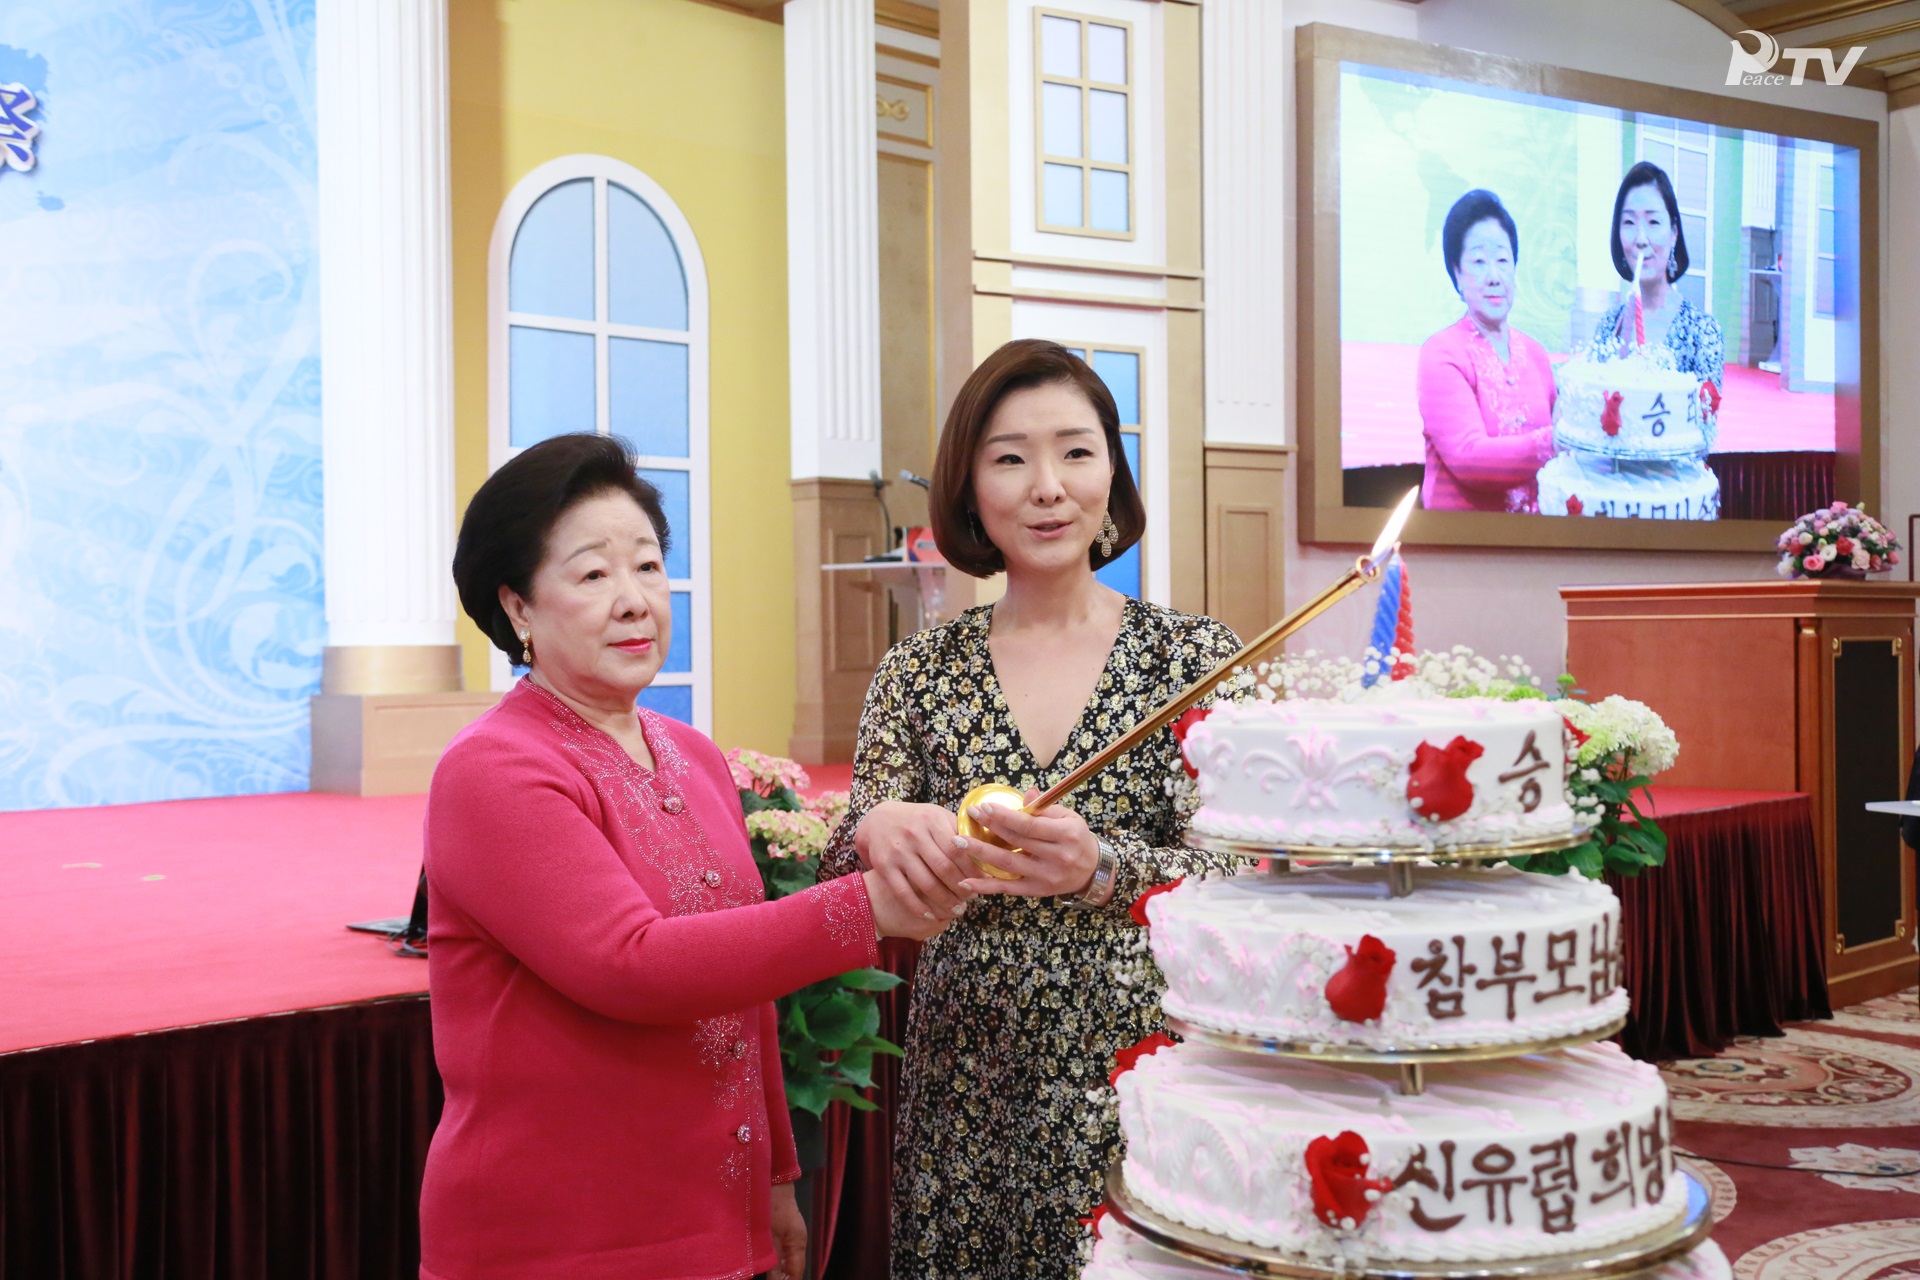 Special Victory Luncheon to Celebrate True Parents’ Safe Return, Heavenly Europe’s Hopeful March Forward Rally and the 2018 Cheongpyeong Hyo Jeong International Azalea Festival  (May 7)